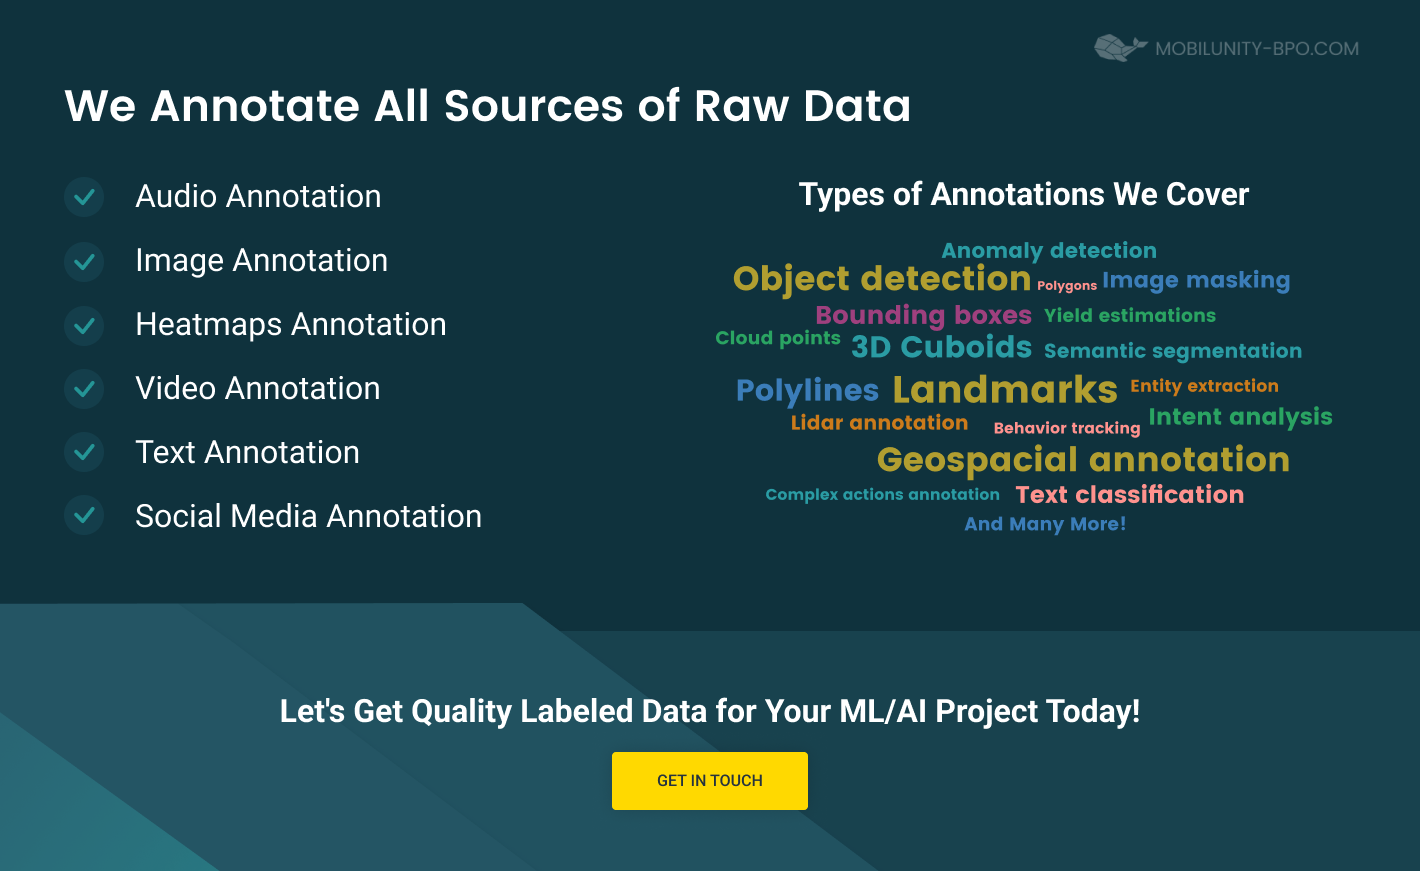 All Types of Data Annotations Covered